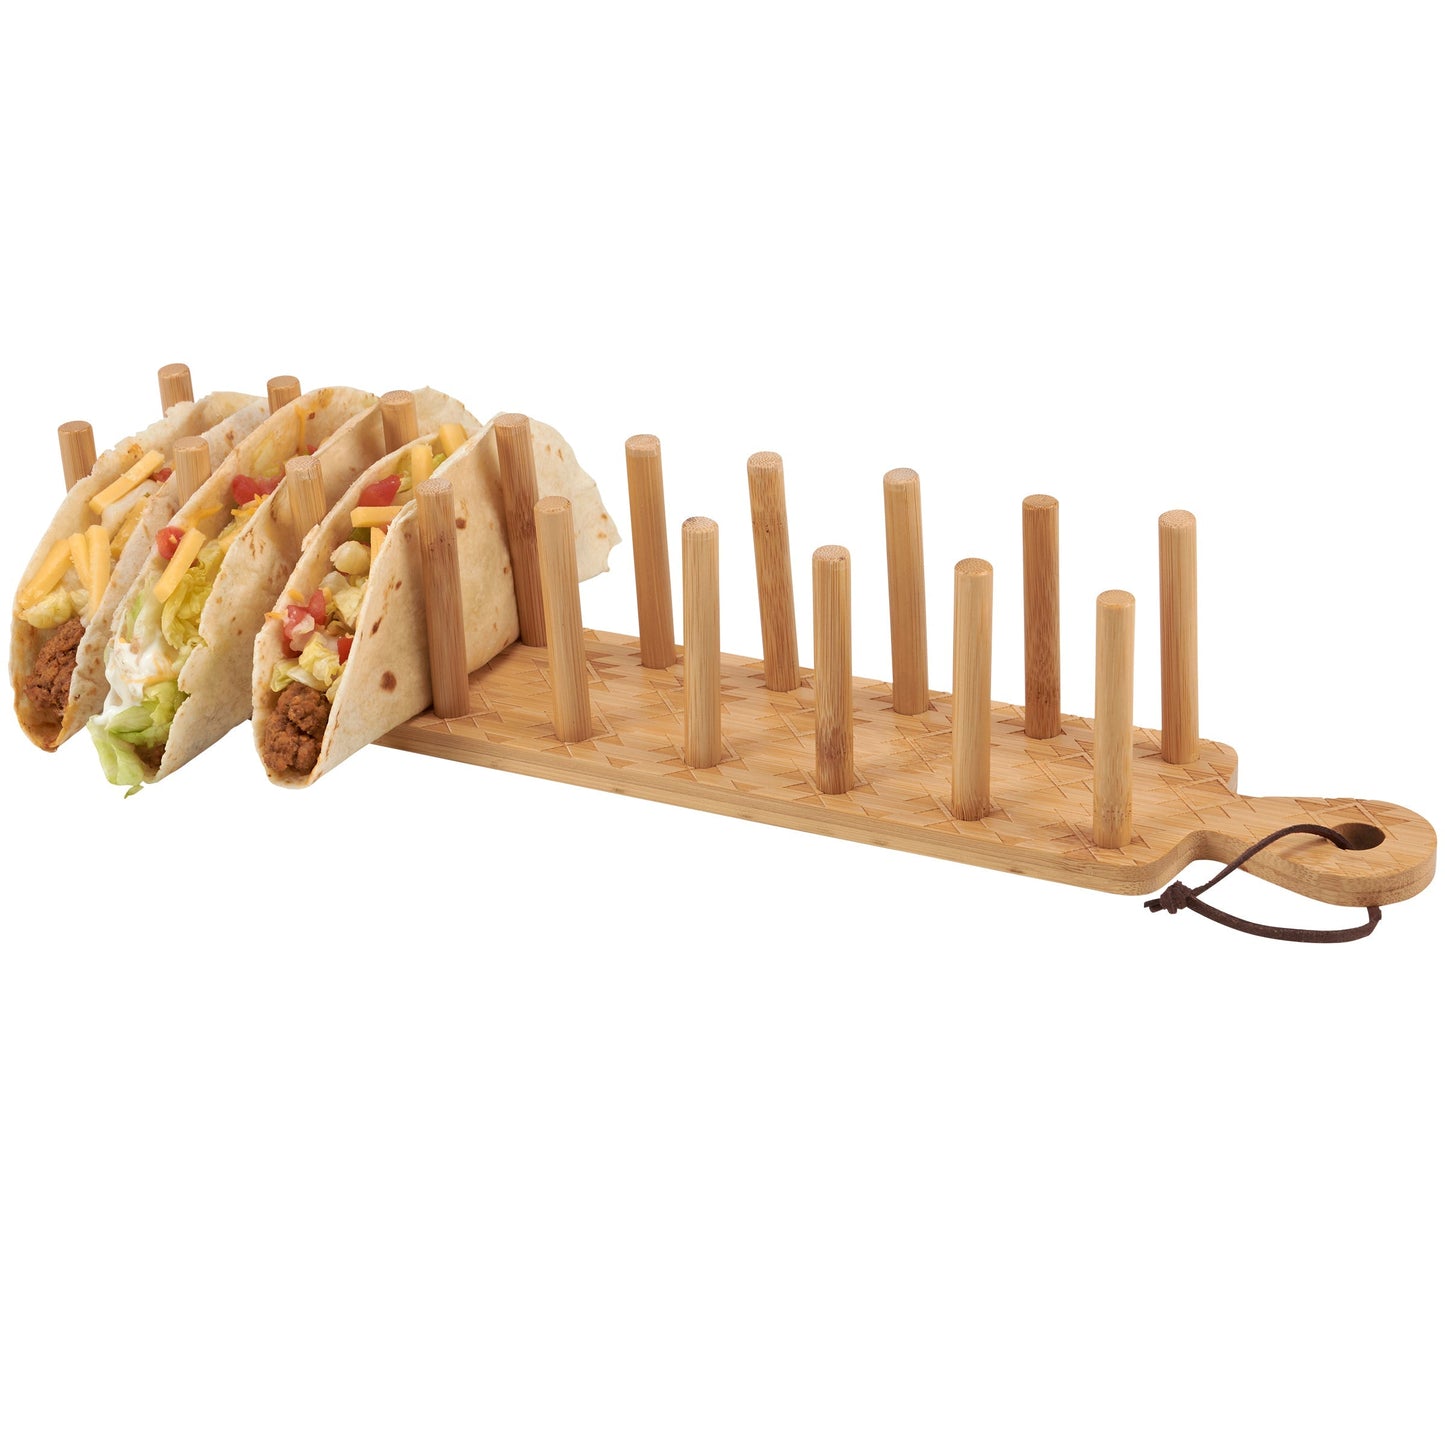 Aztec Pattern Wood Taco Holder | Holds Up To 8 Tacos